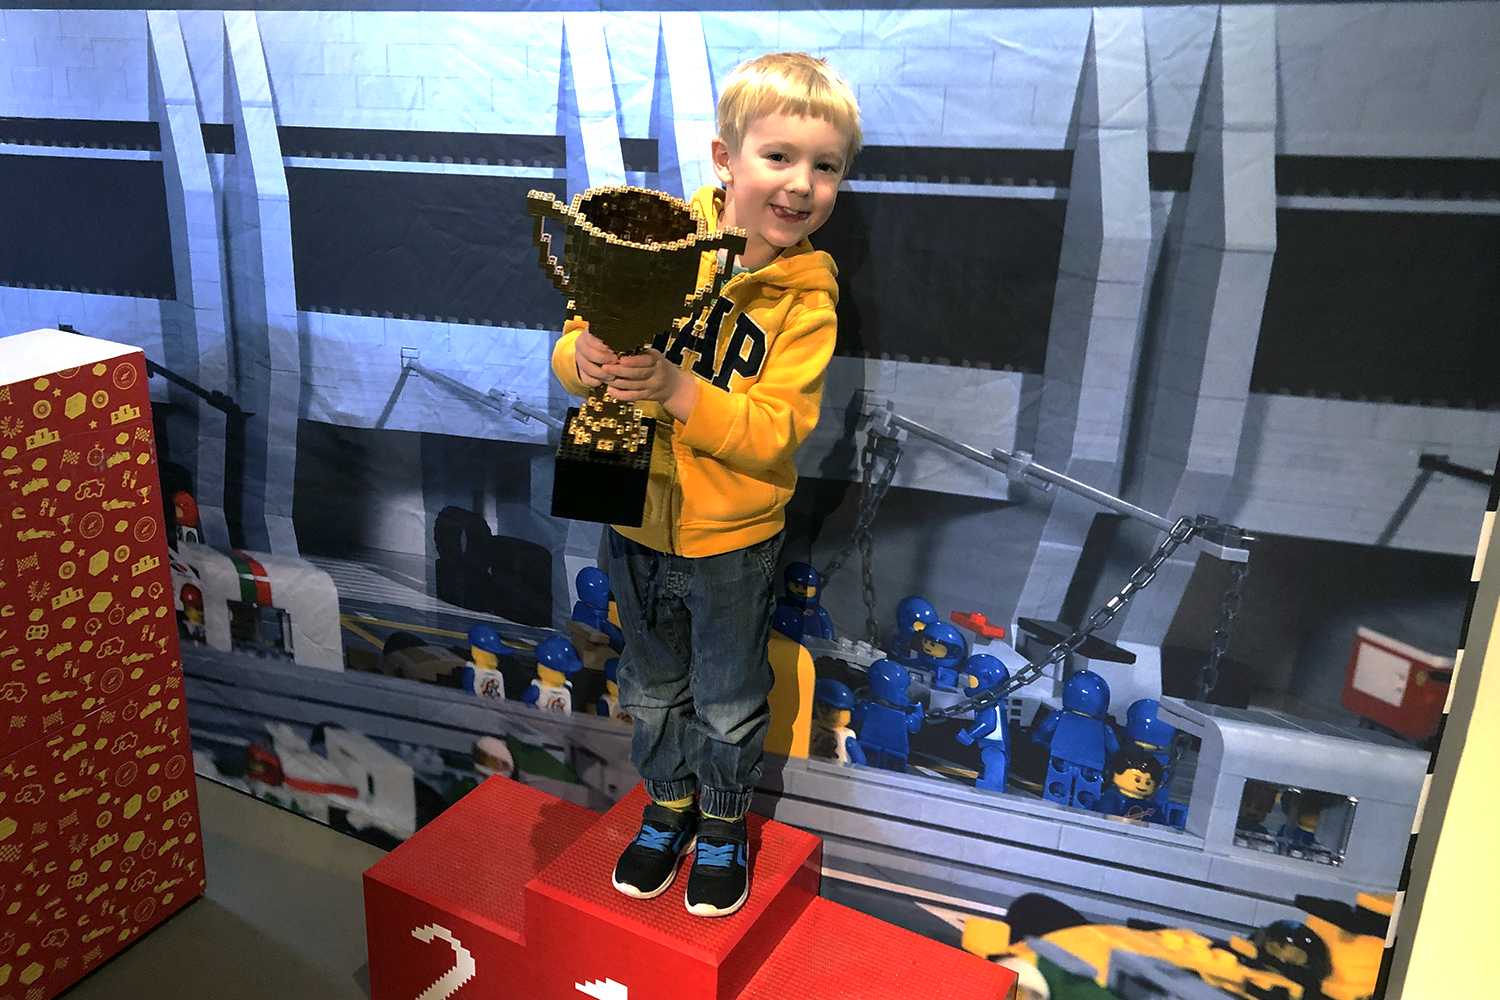 Gabe holding a Lego cup at the Brick Science event at Rheged